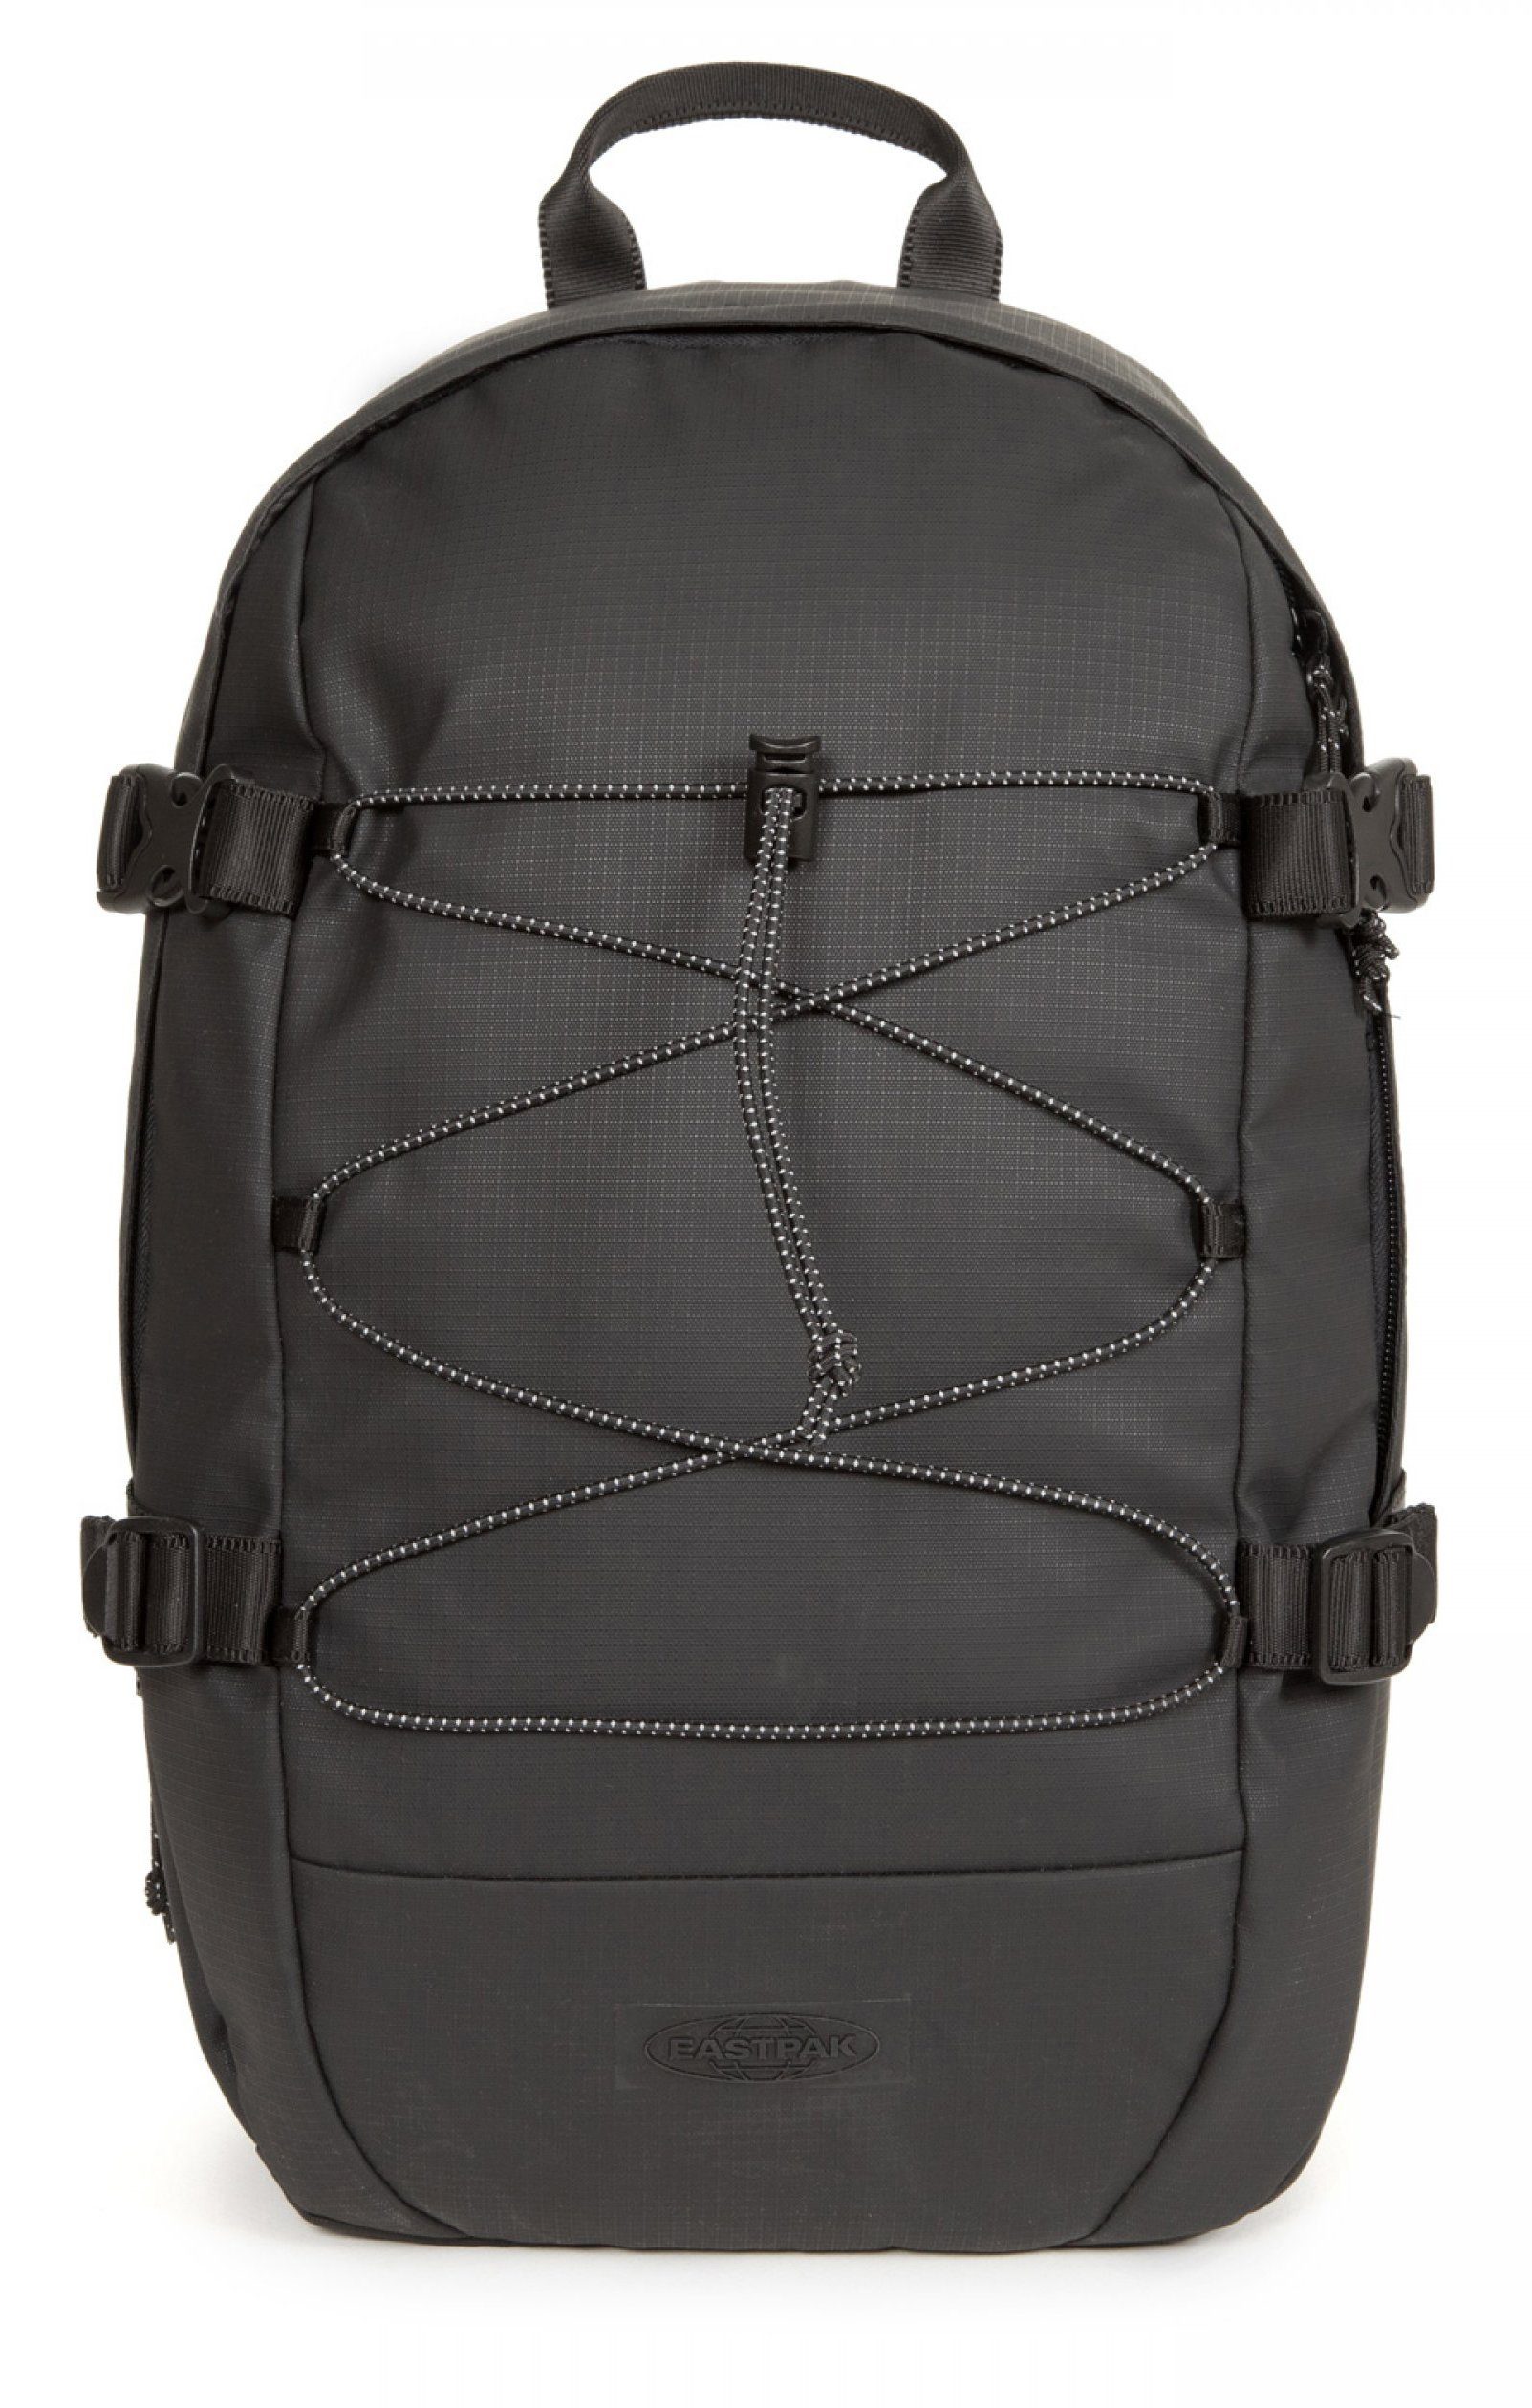 Eastpak Laptoprucksack BORYS, Surfaced Black, Bungee-Seil, enthält  recyceltes Material (Global Recycled Standard)